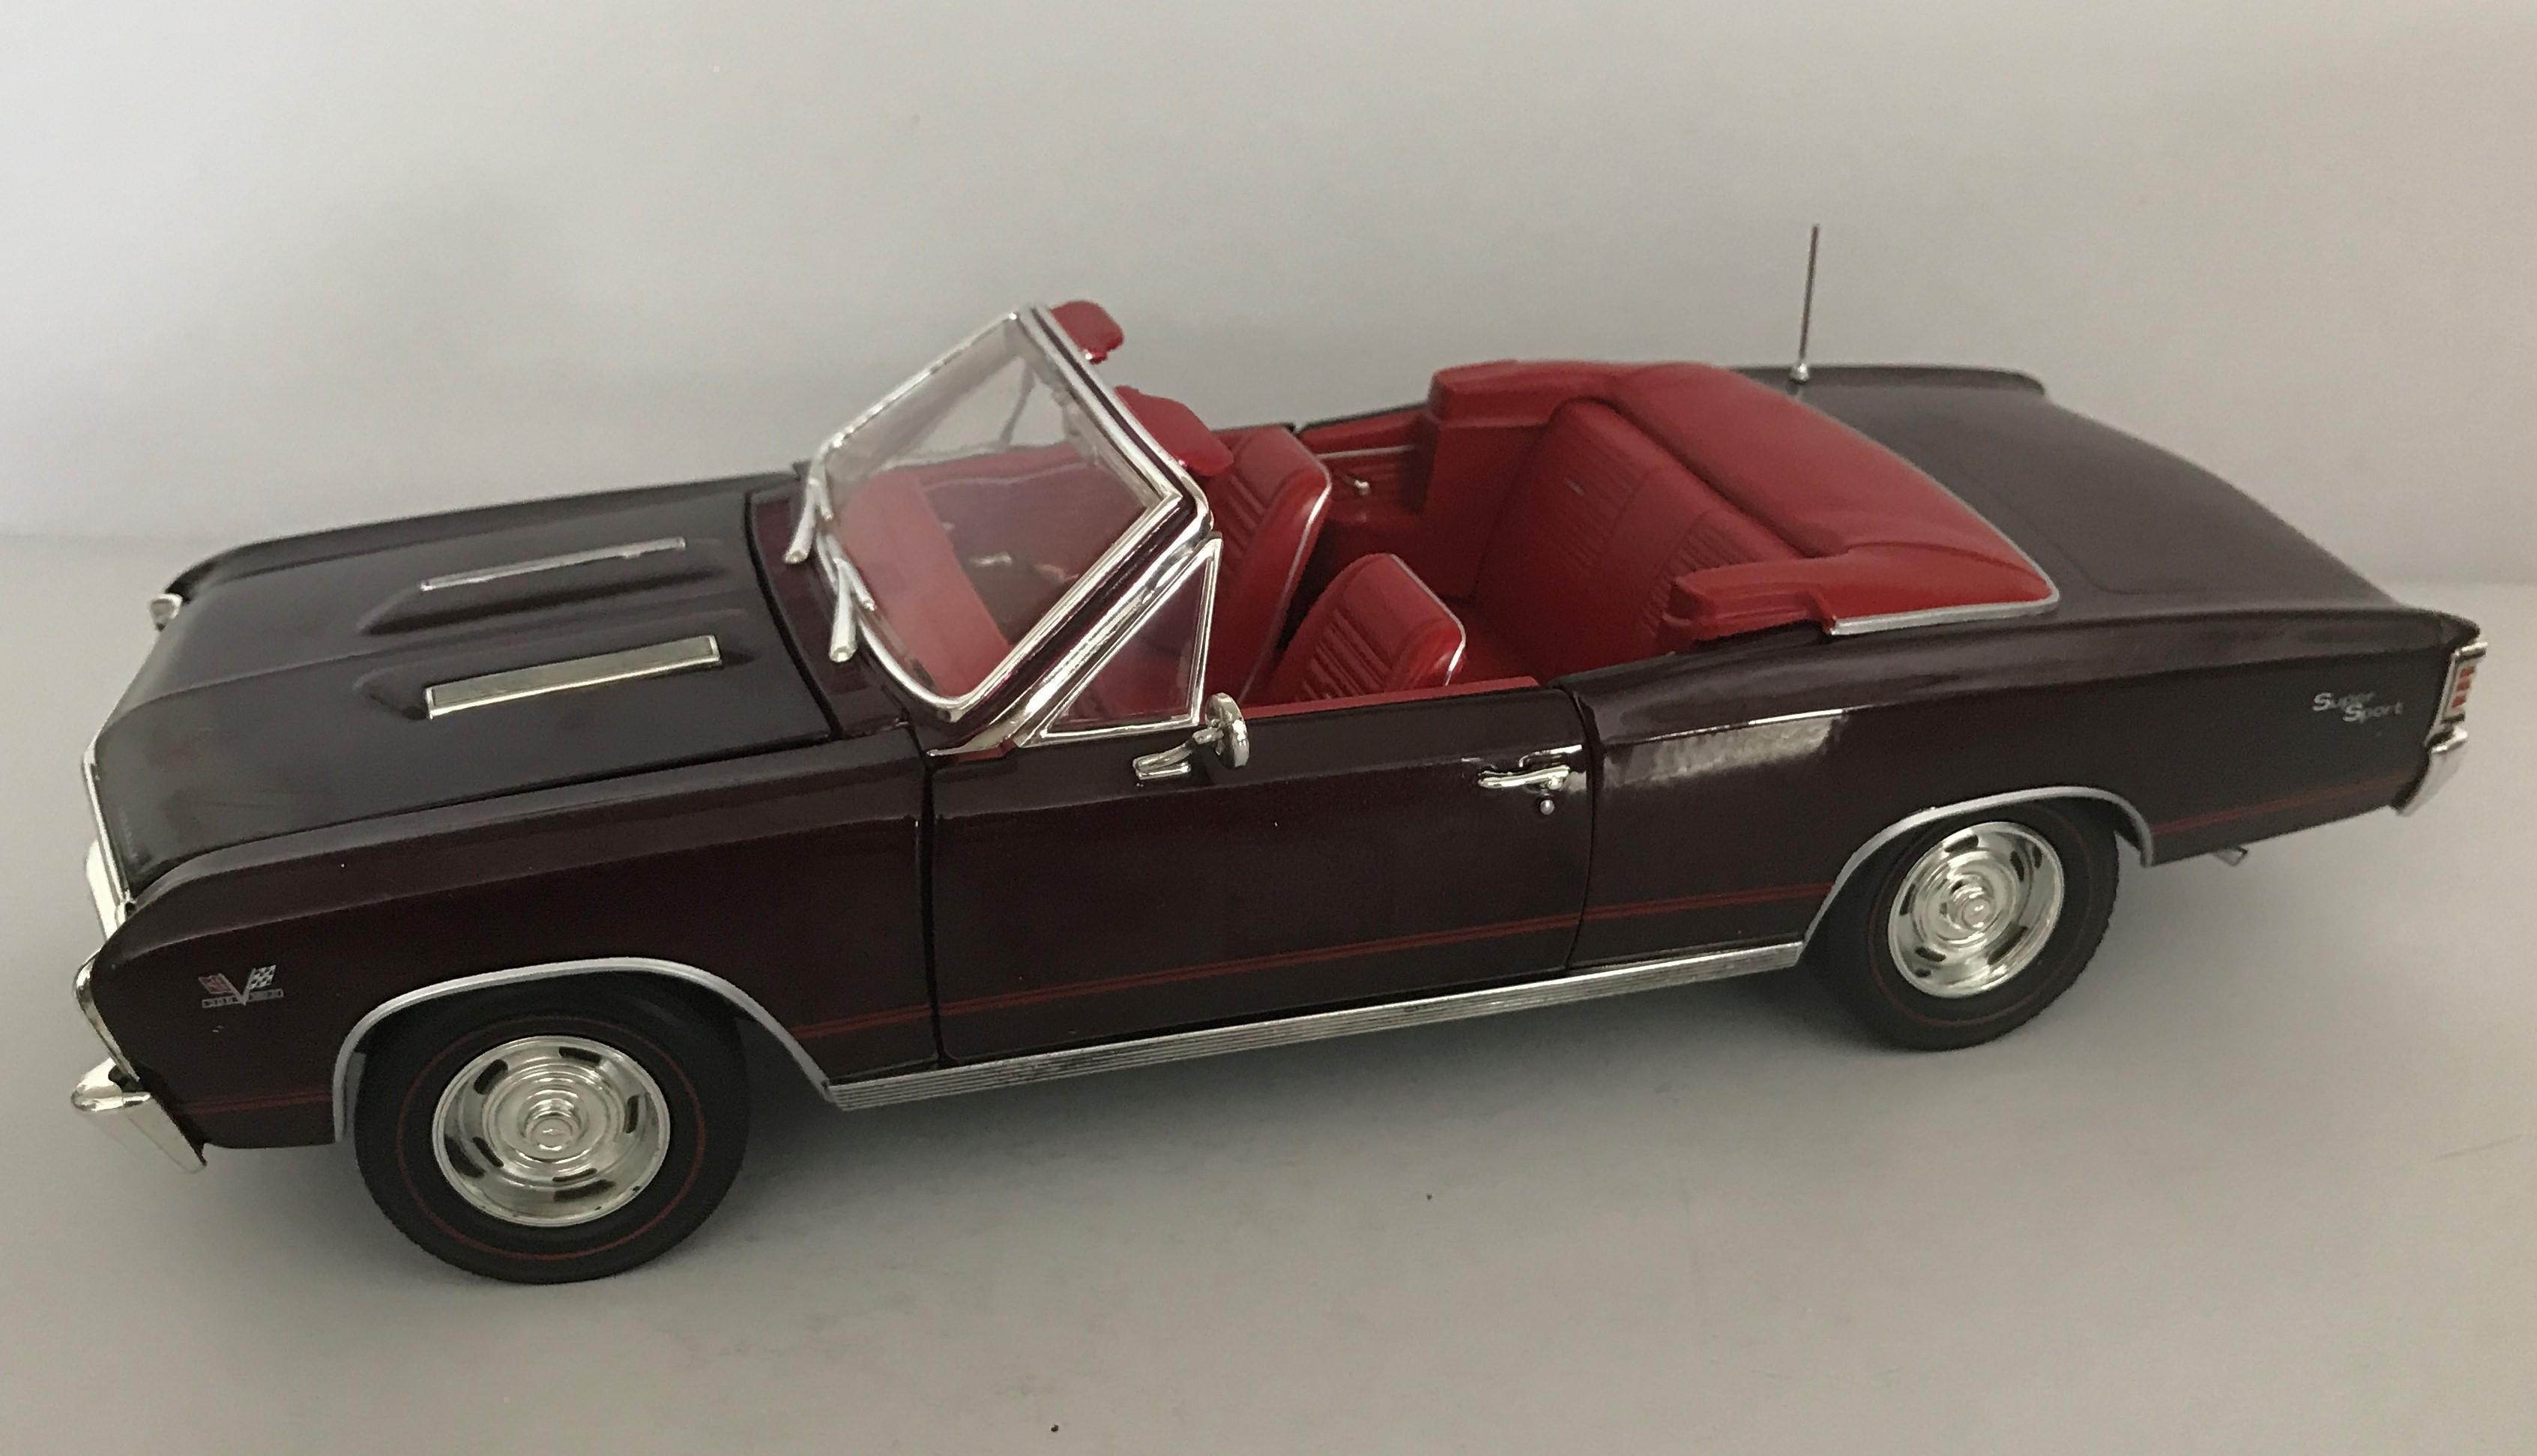 1967 Chevy Chevelle SS Convertible Madeira Maroon American Muscle 1:18 Scale Die Cast Metal Model Car